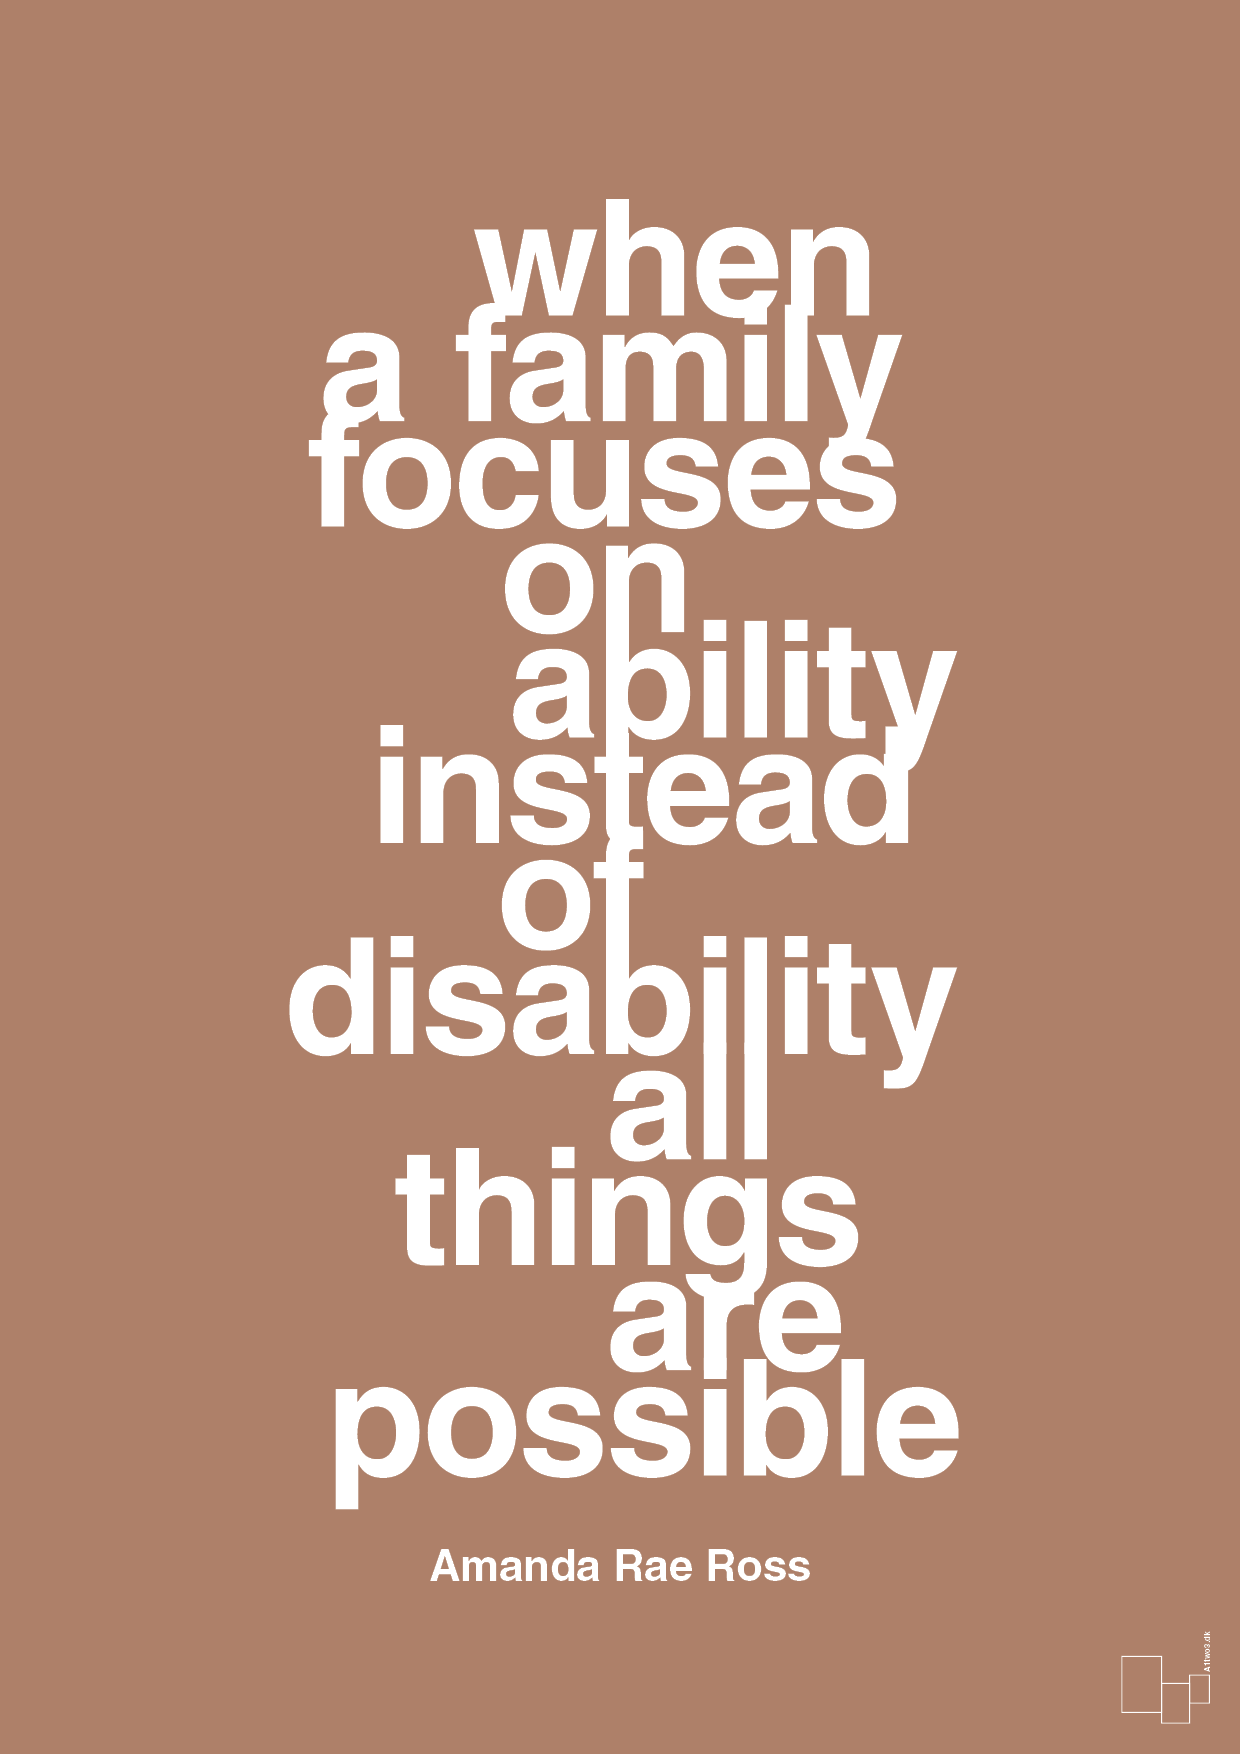 when a family focuses on ability instead of disability all things are possible - Plakat med Samfund i Cider Spice